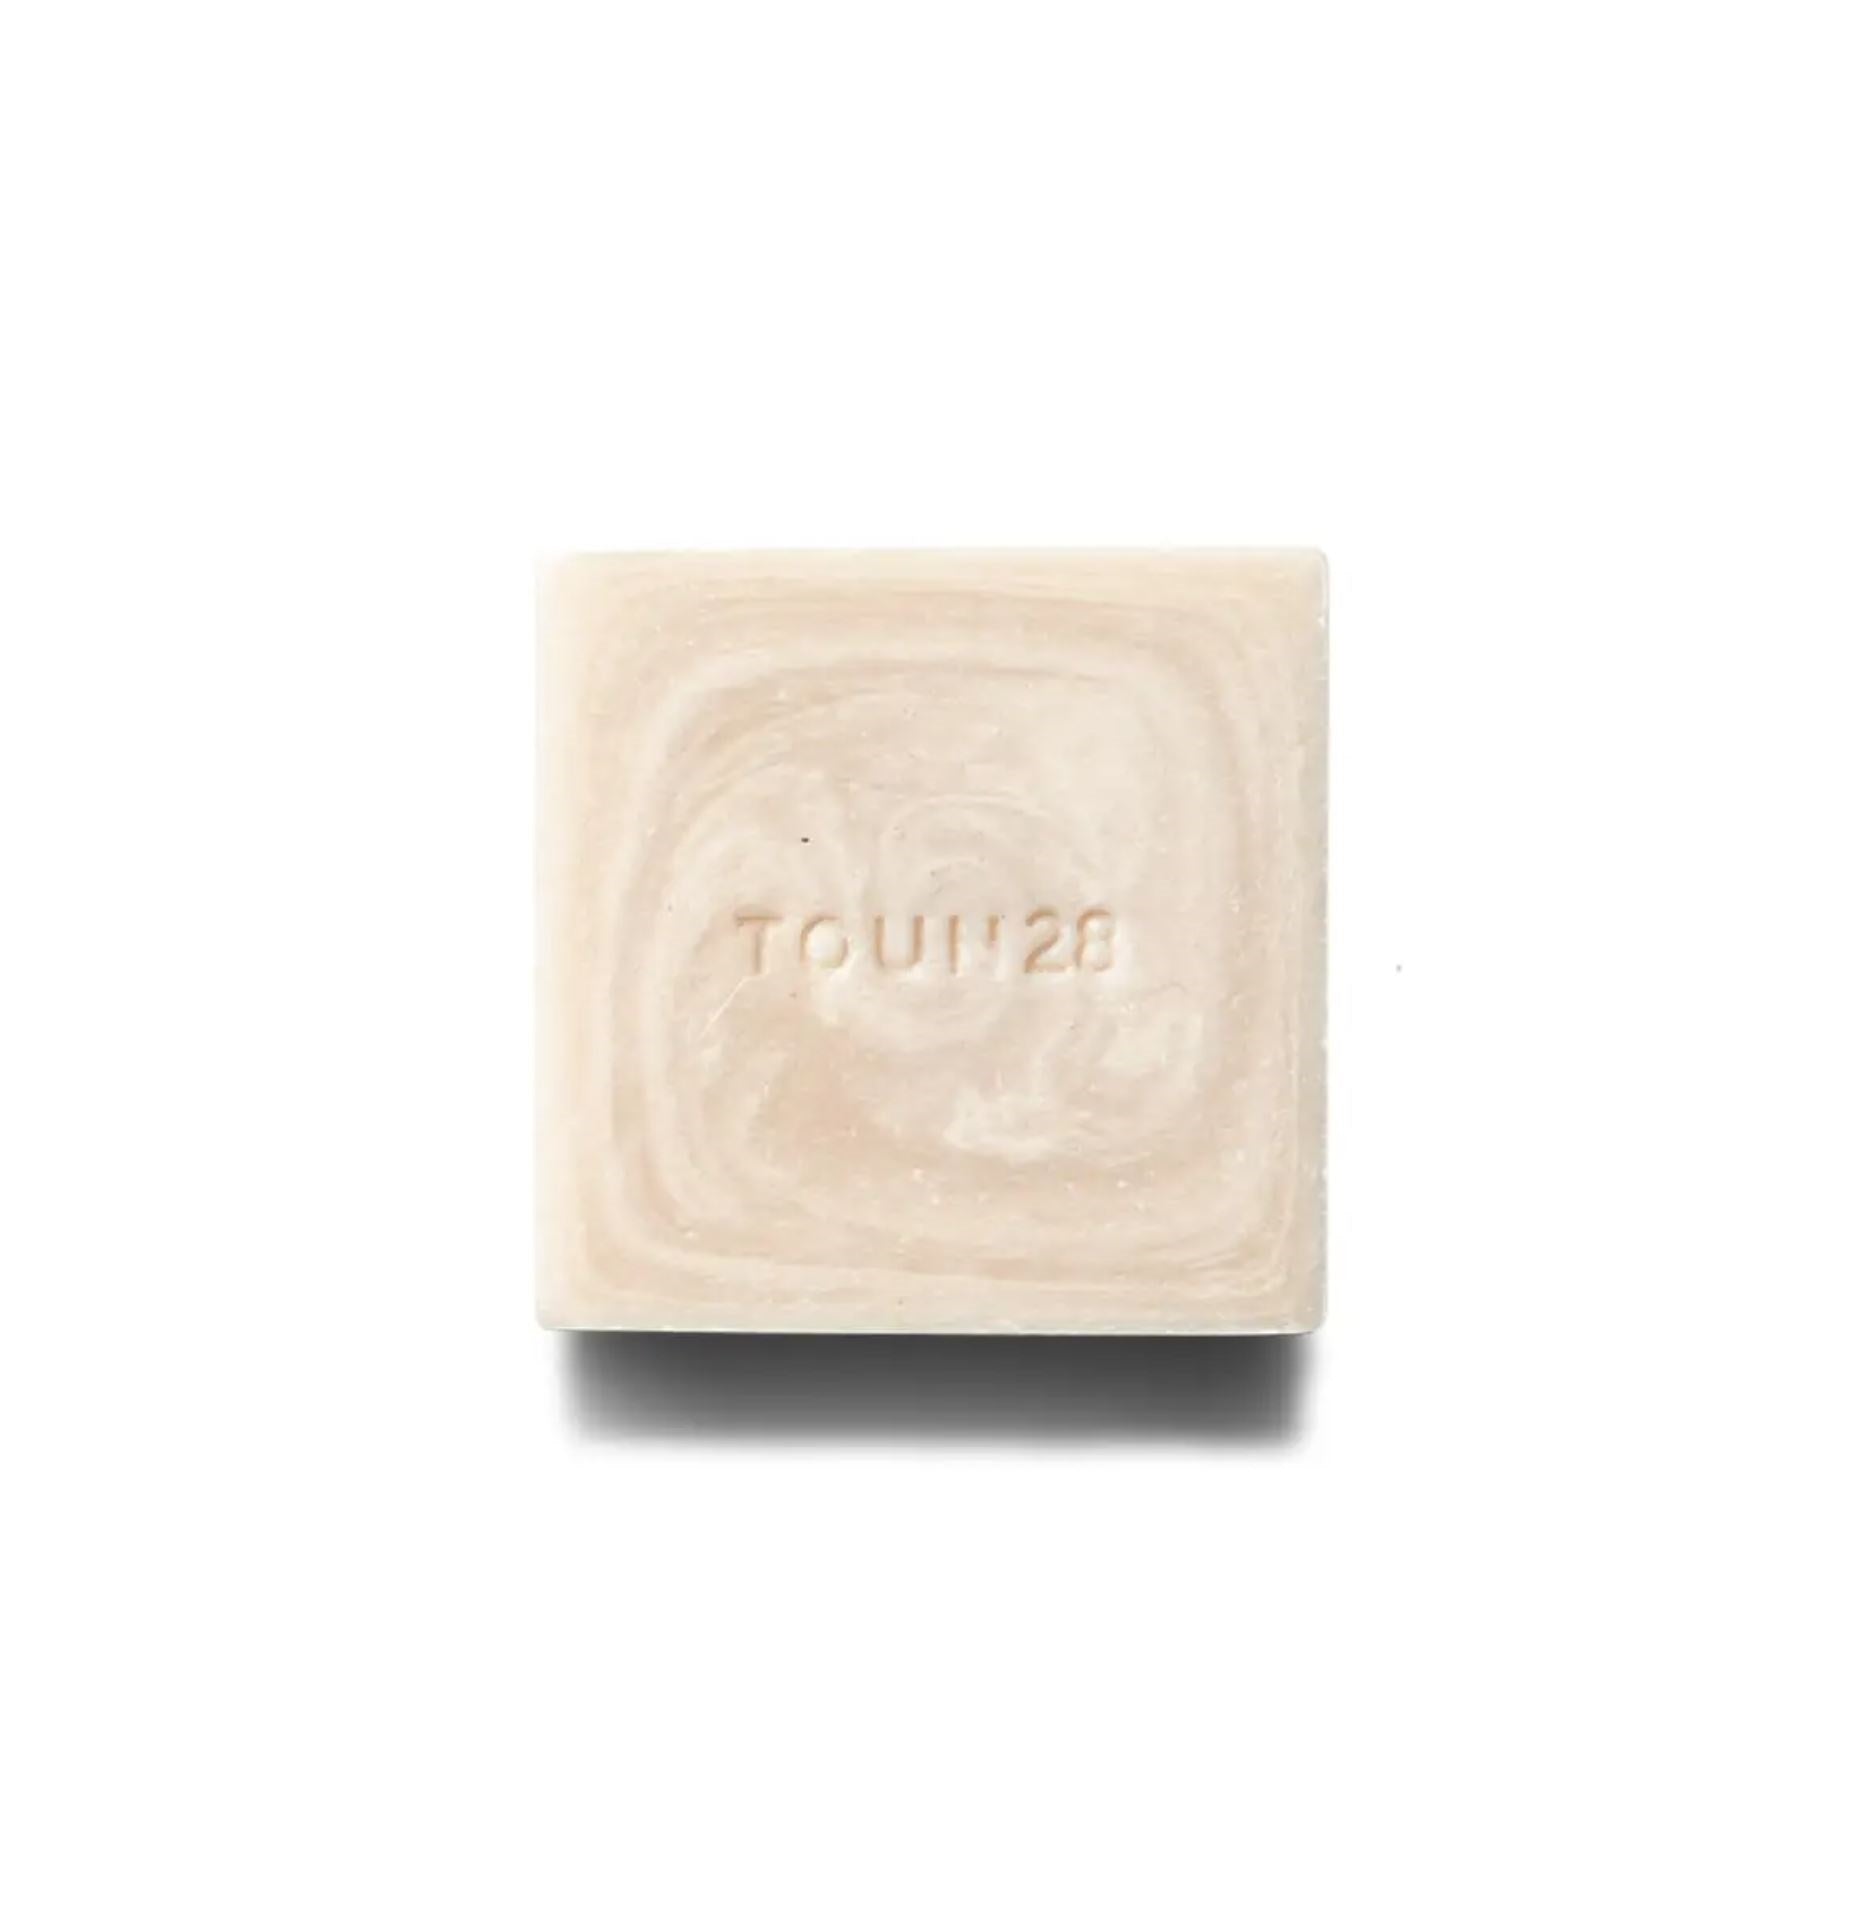 Facial Soap S14 Foremilk 85g